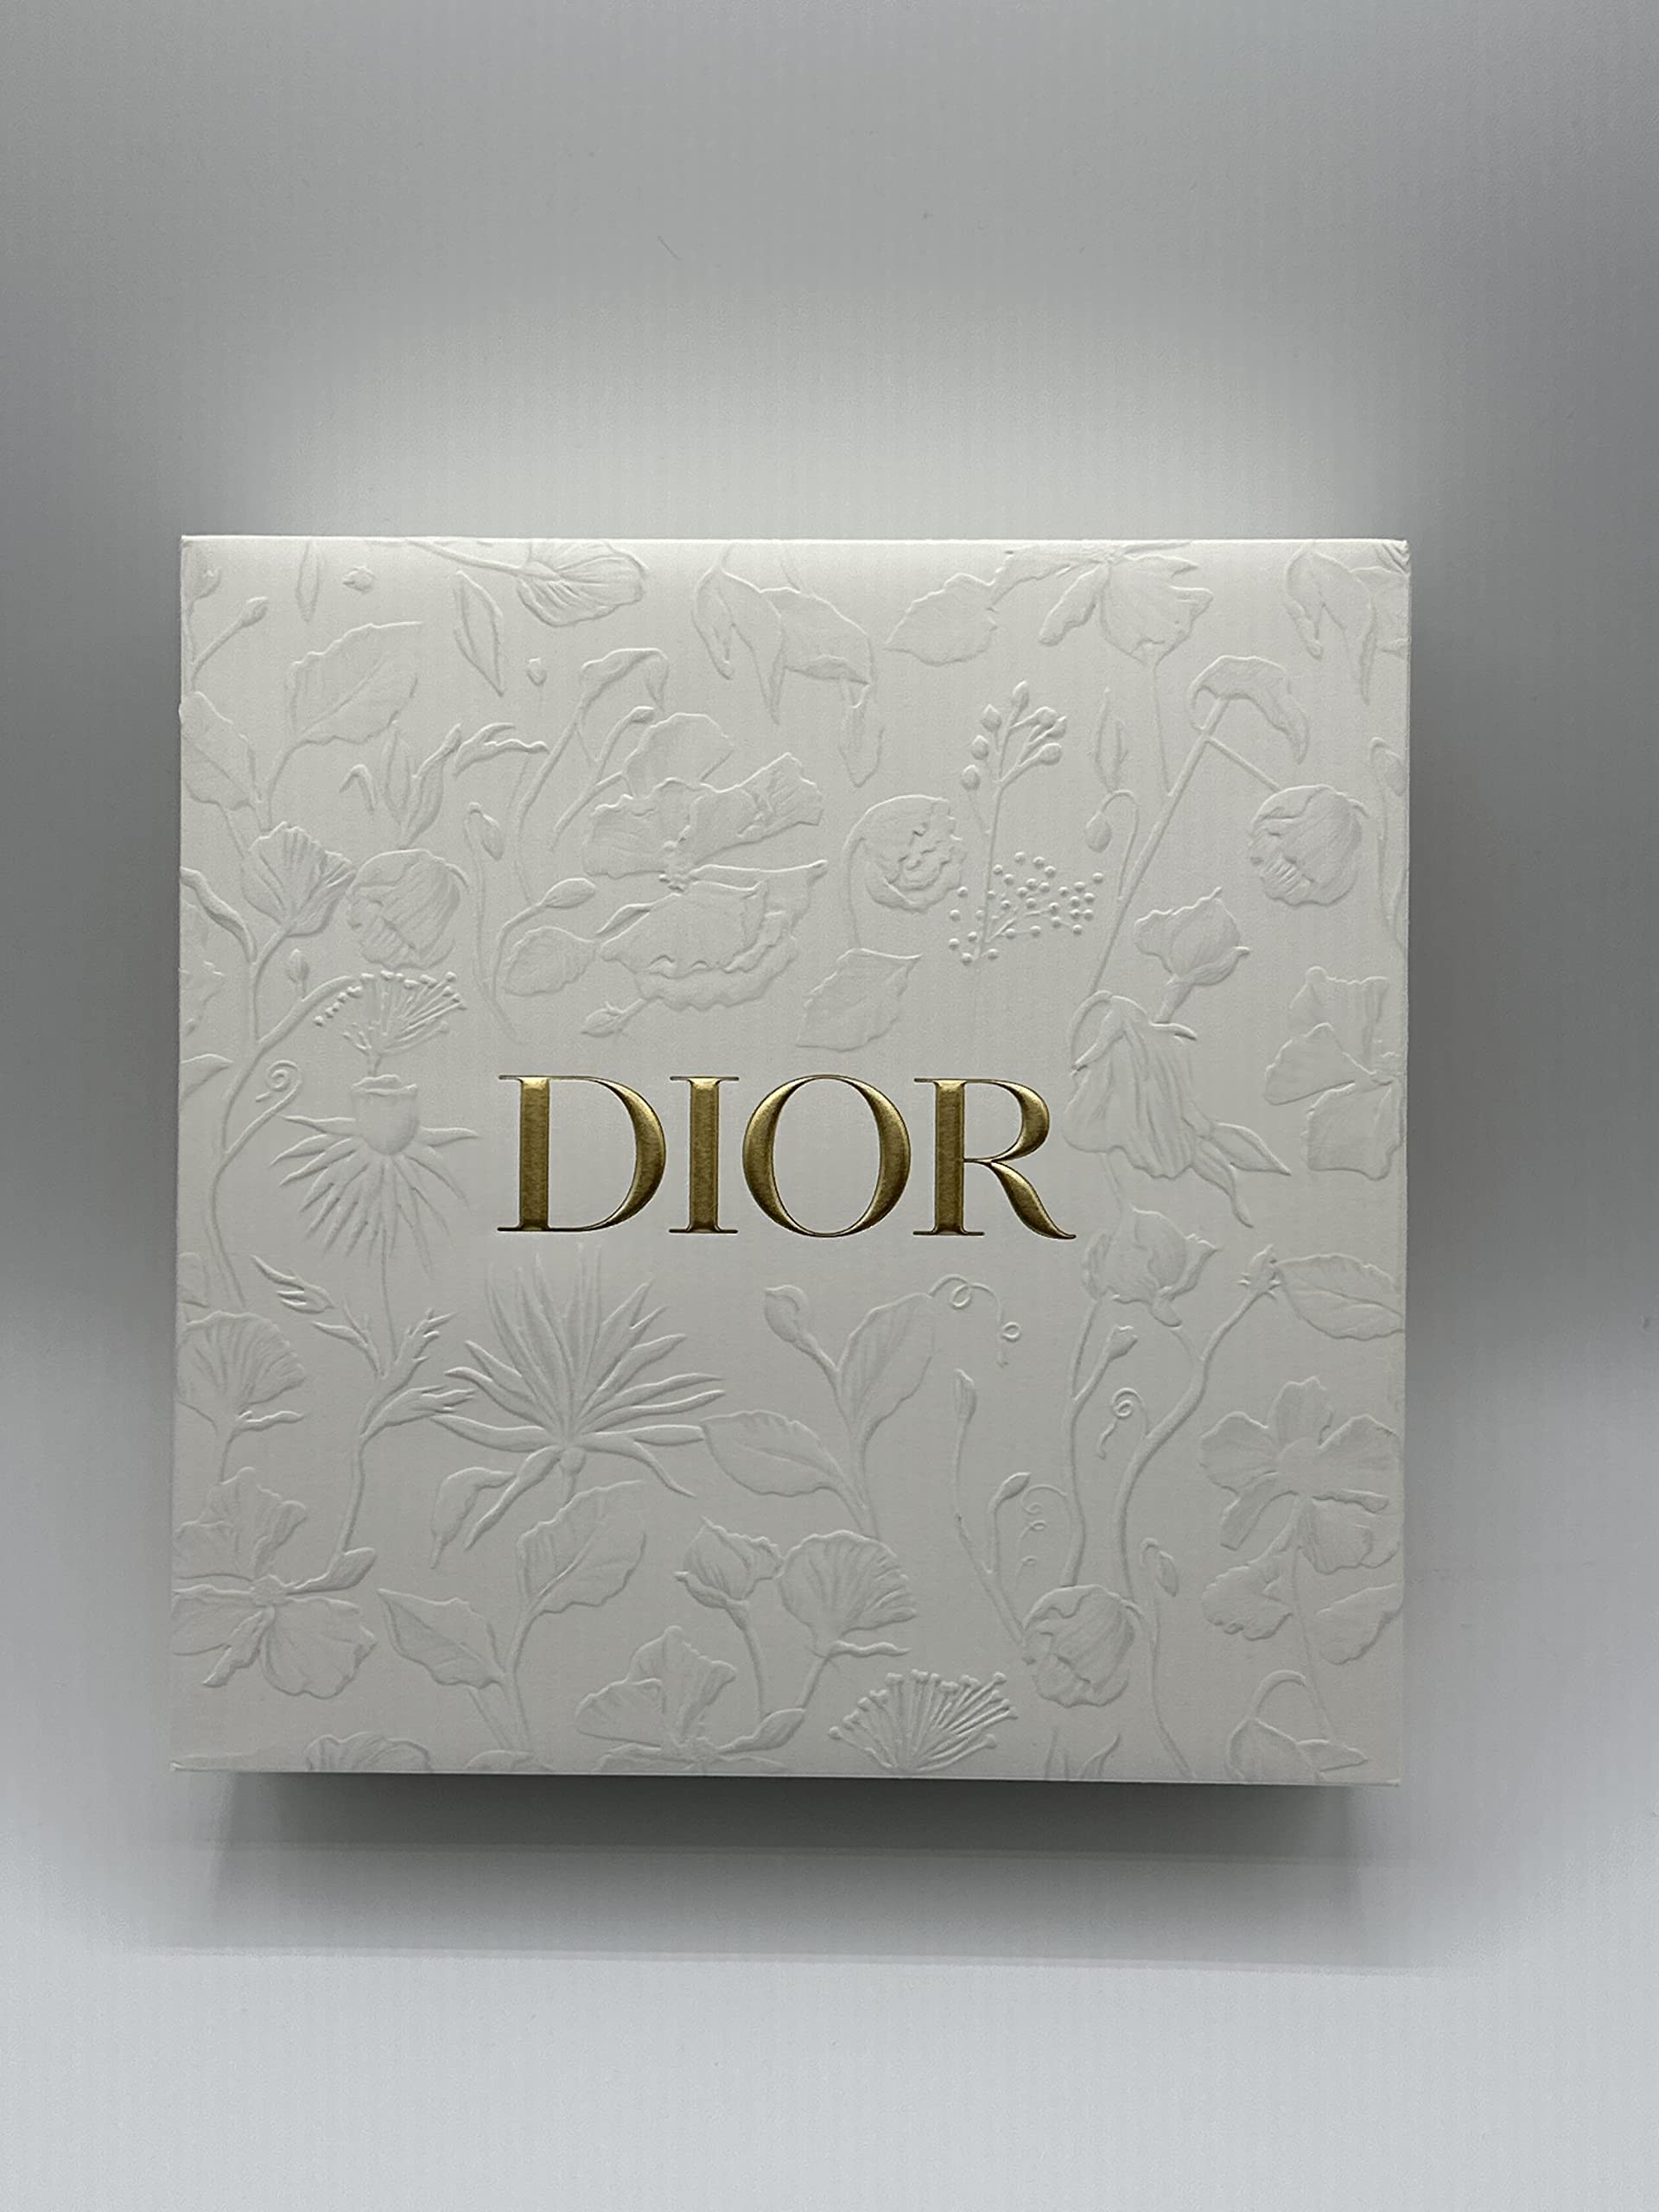 Miss Dior Blooming Bouquet Set